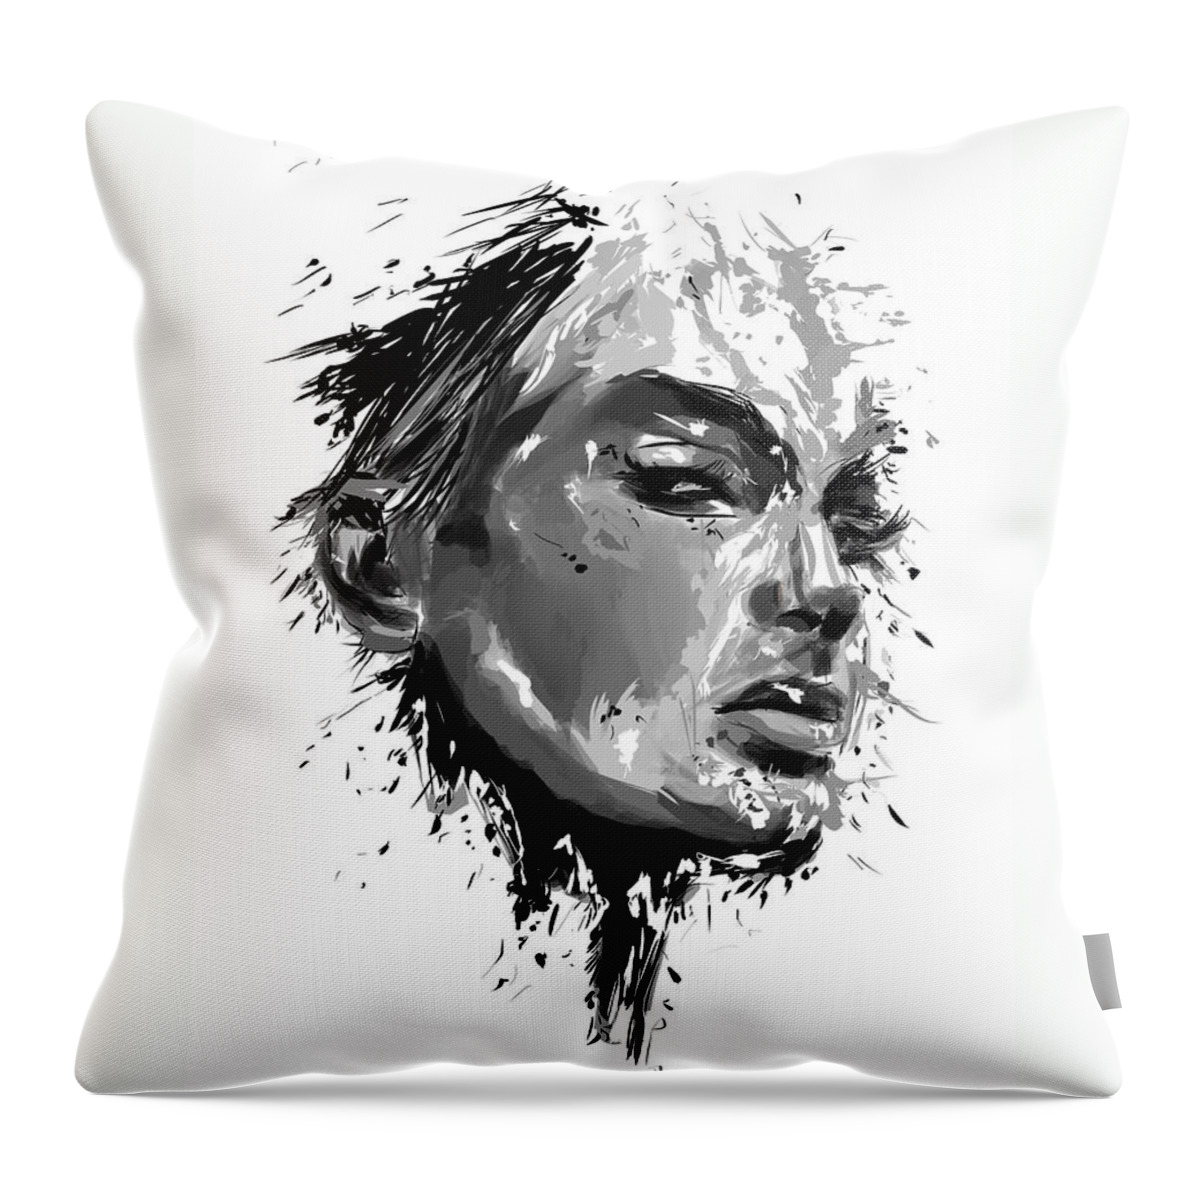 Look Throw Pillow featuring the mixed media I see you by Balazs Solti